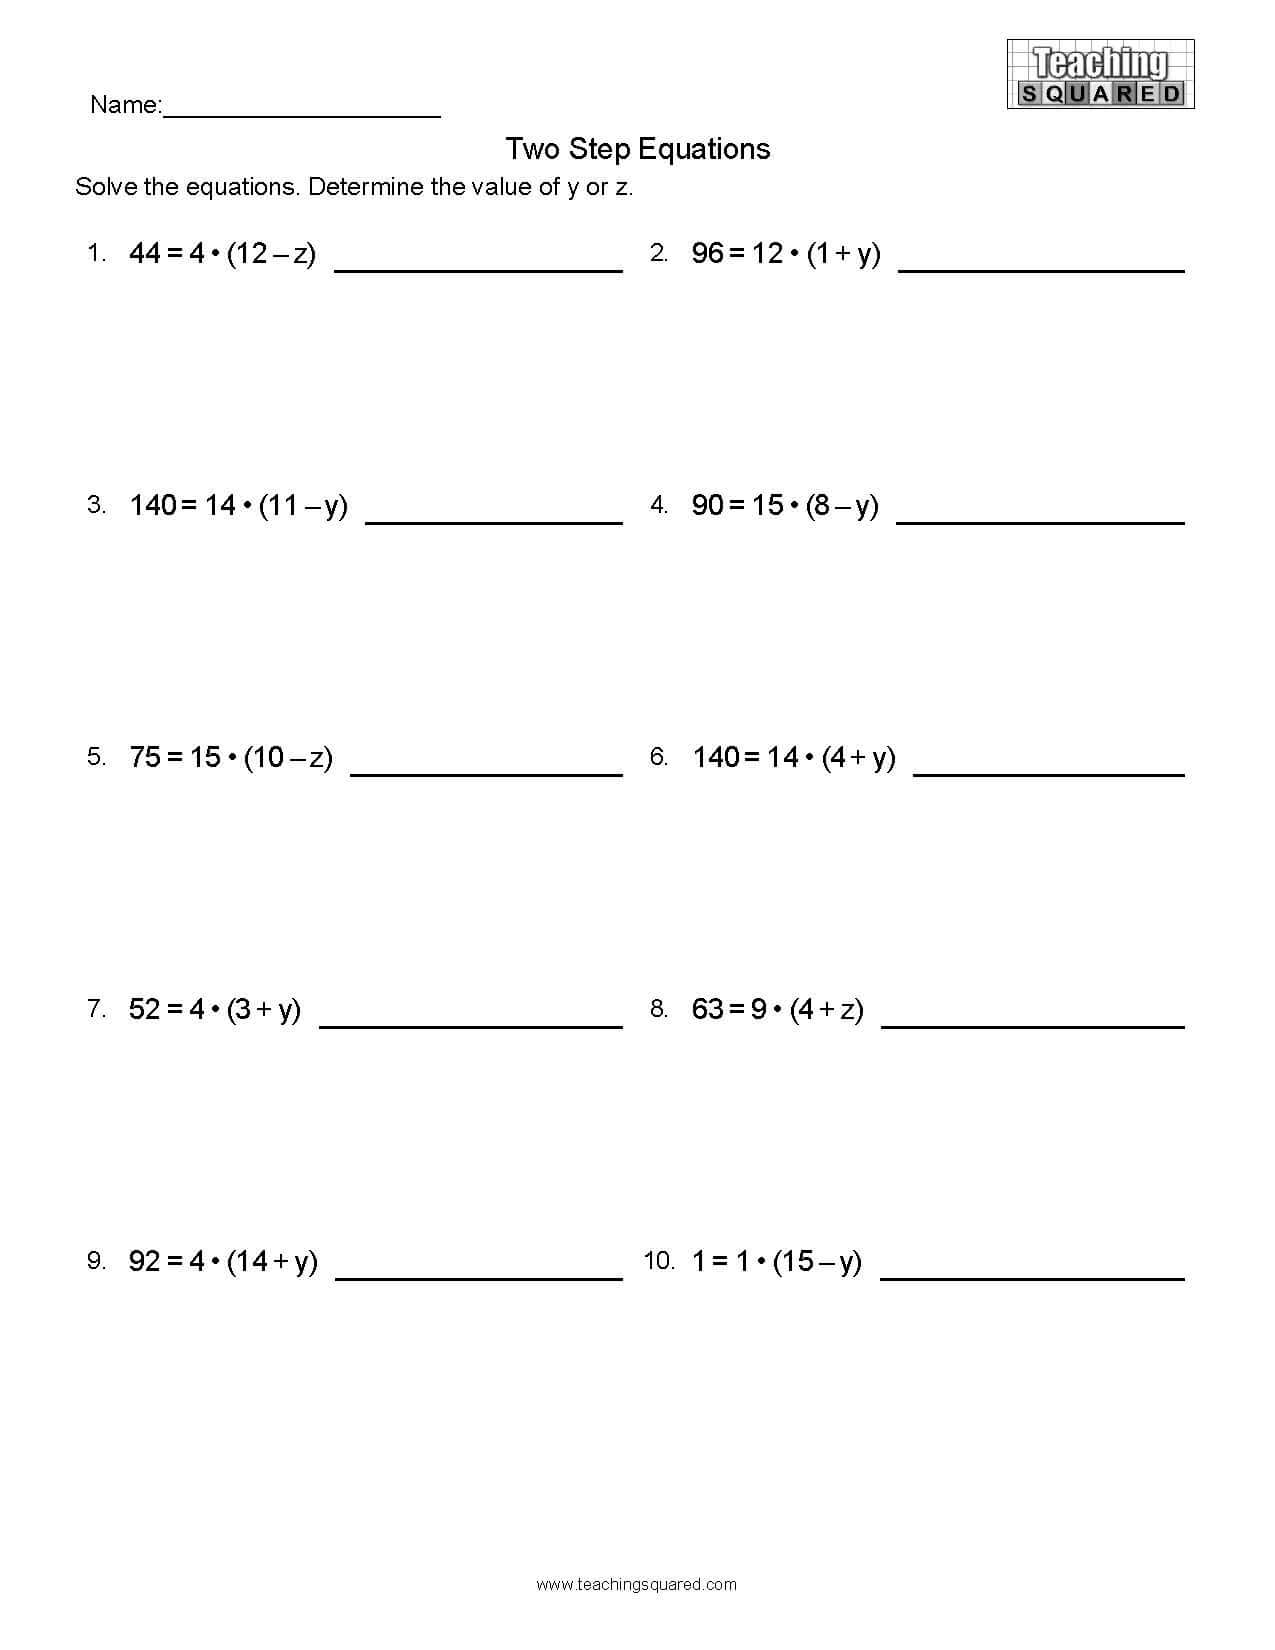 Equations- Parenthesis R25 - Teaching Squared Pertaining To Two Step Equations Worksheet Answers